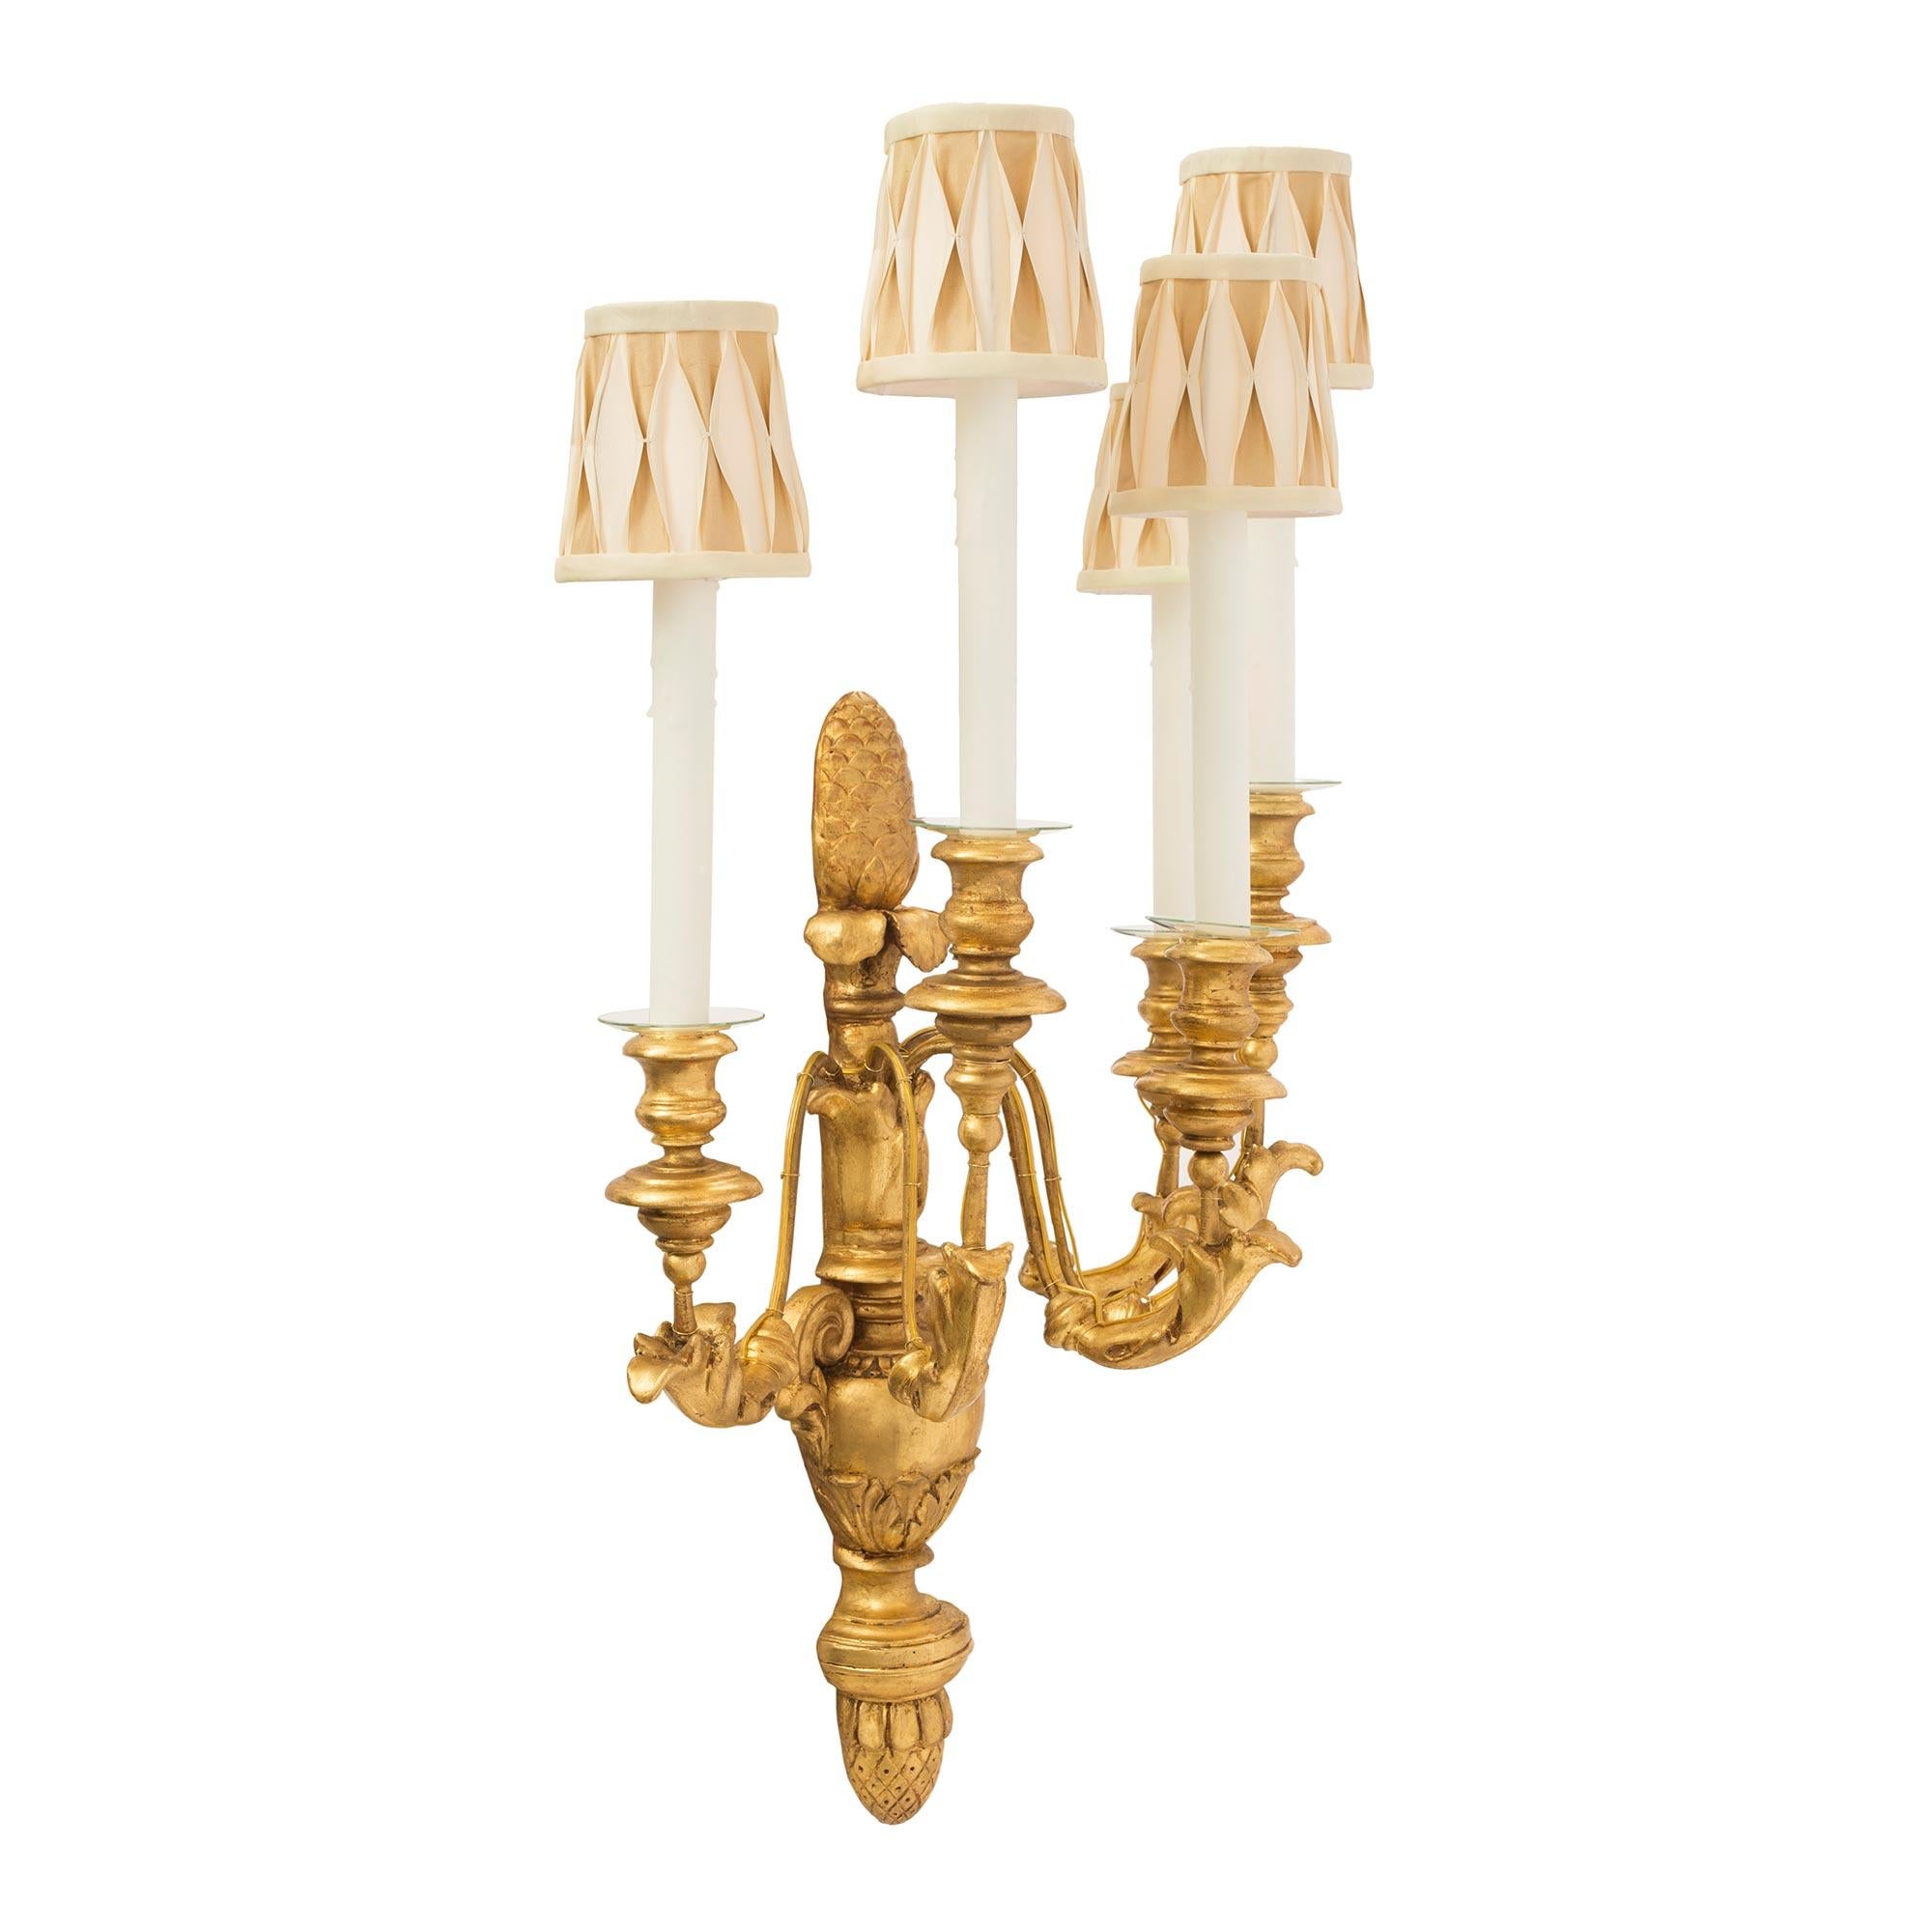 Pair of Italian 19th Century Five-Arm Giltwood Tuscan Sconces In Good Condition For Sale In West Palm Beach, FL